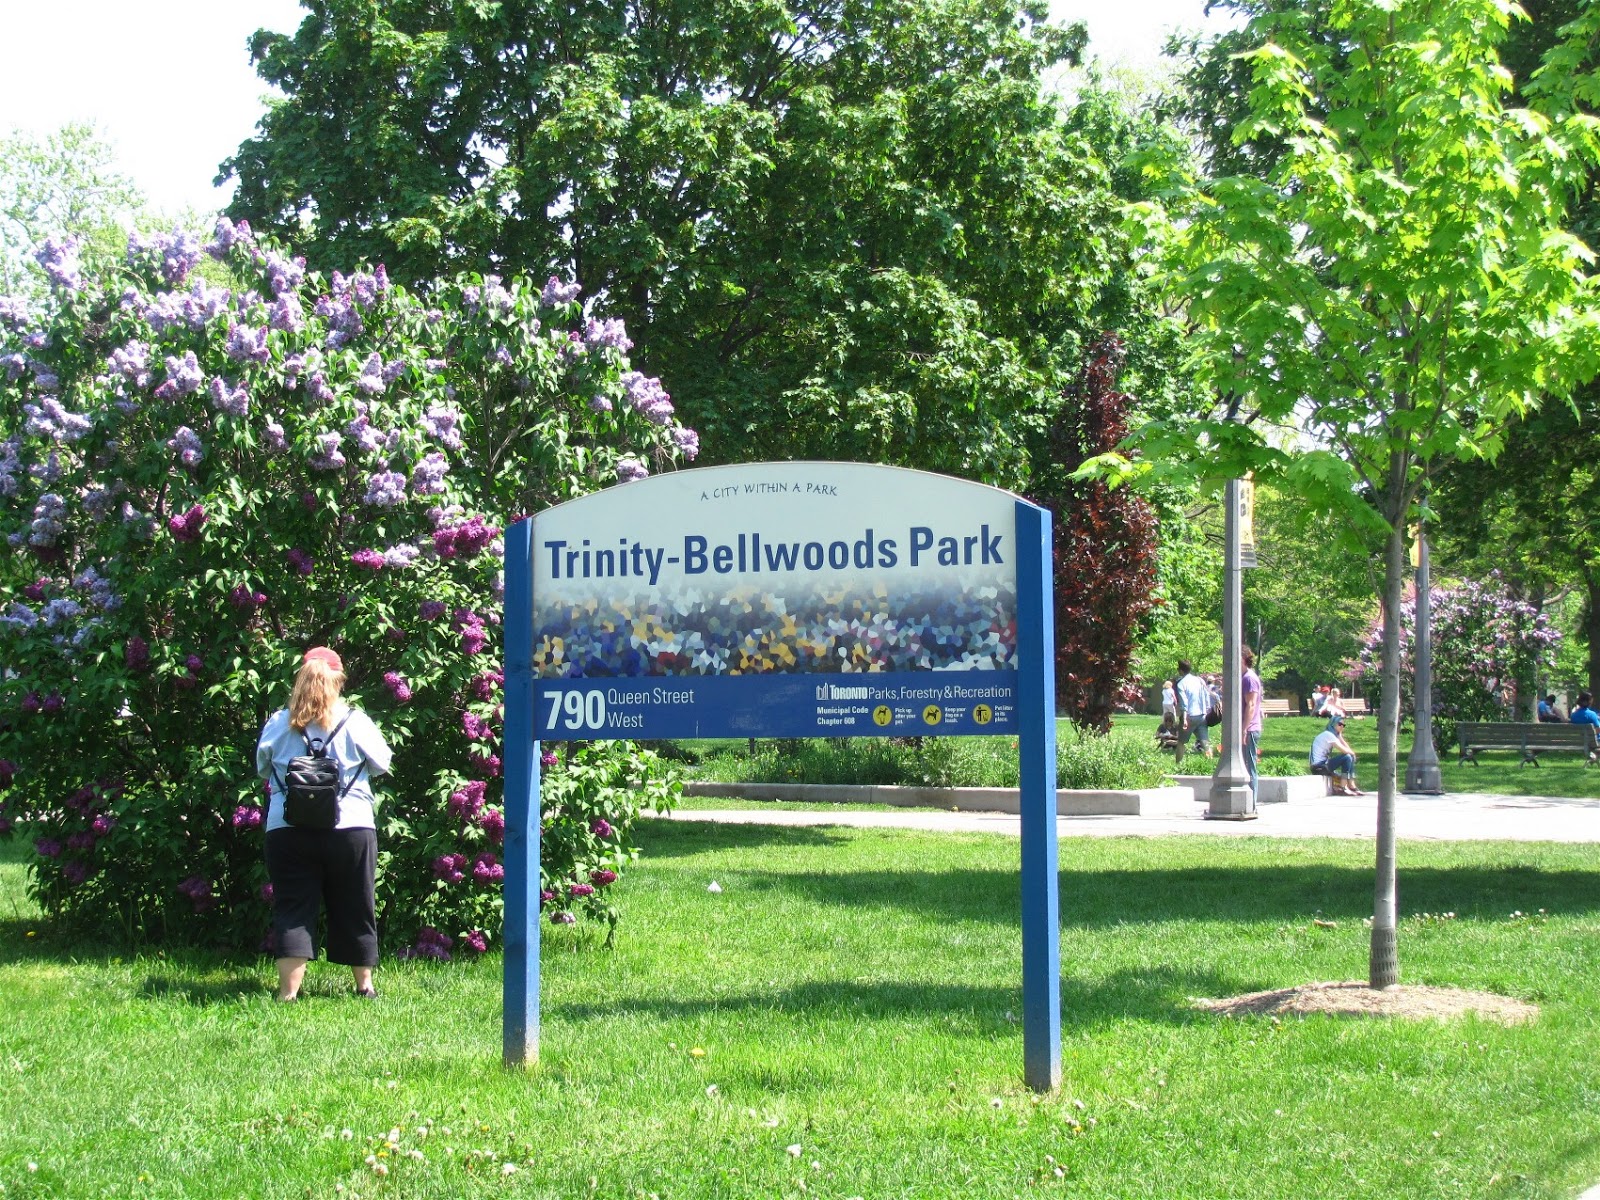 Trinity Bellwoods / The 10 Types Of Park Dwellers Found In Trinity Bellwoods ... / The trinity bellwoods farmers' market.